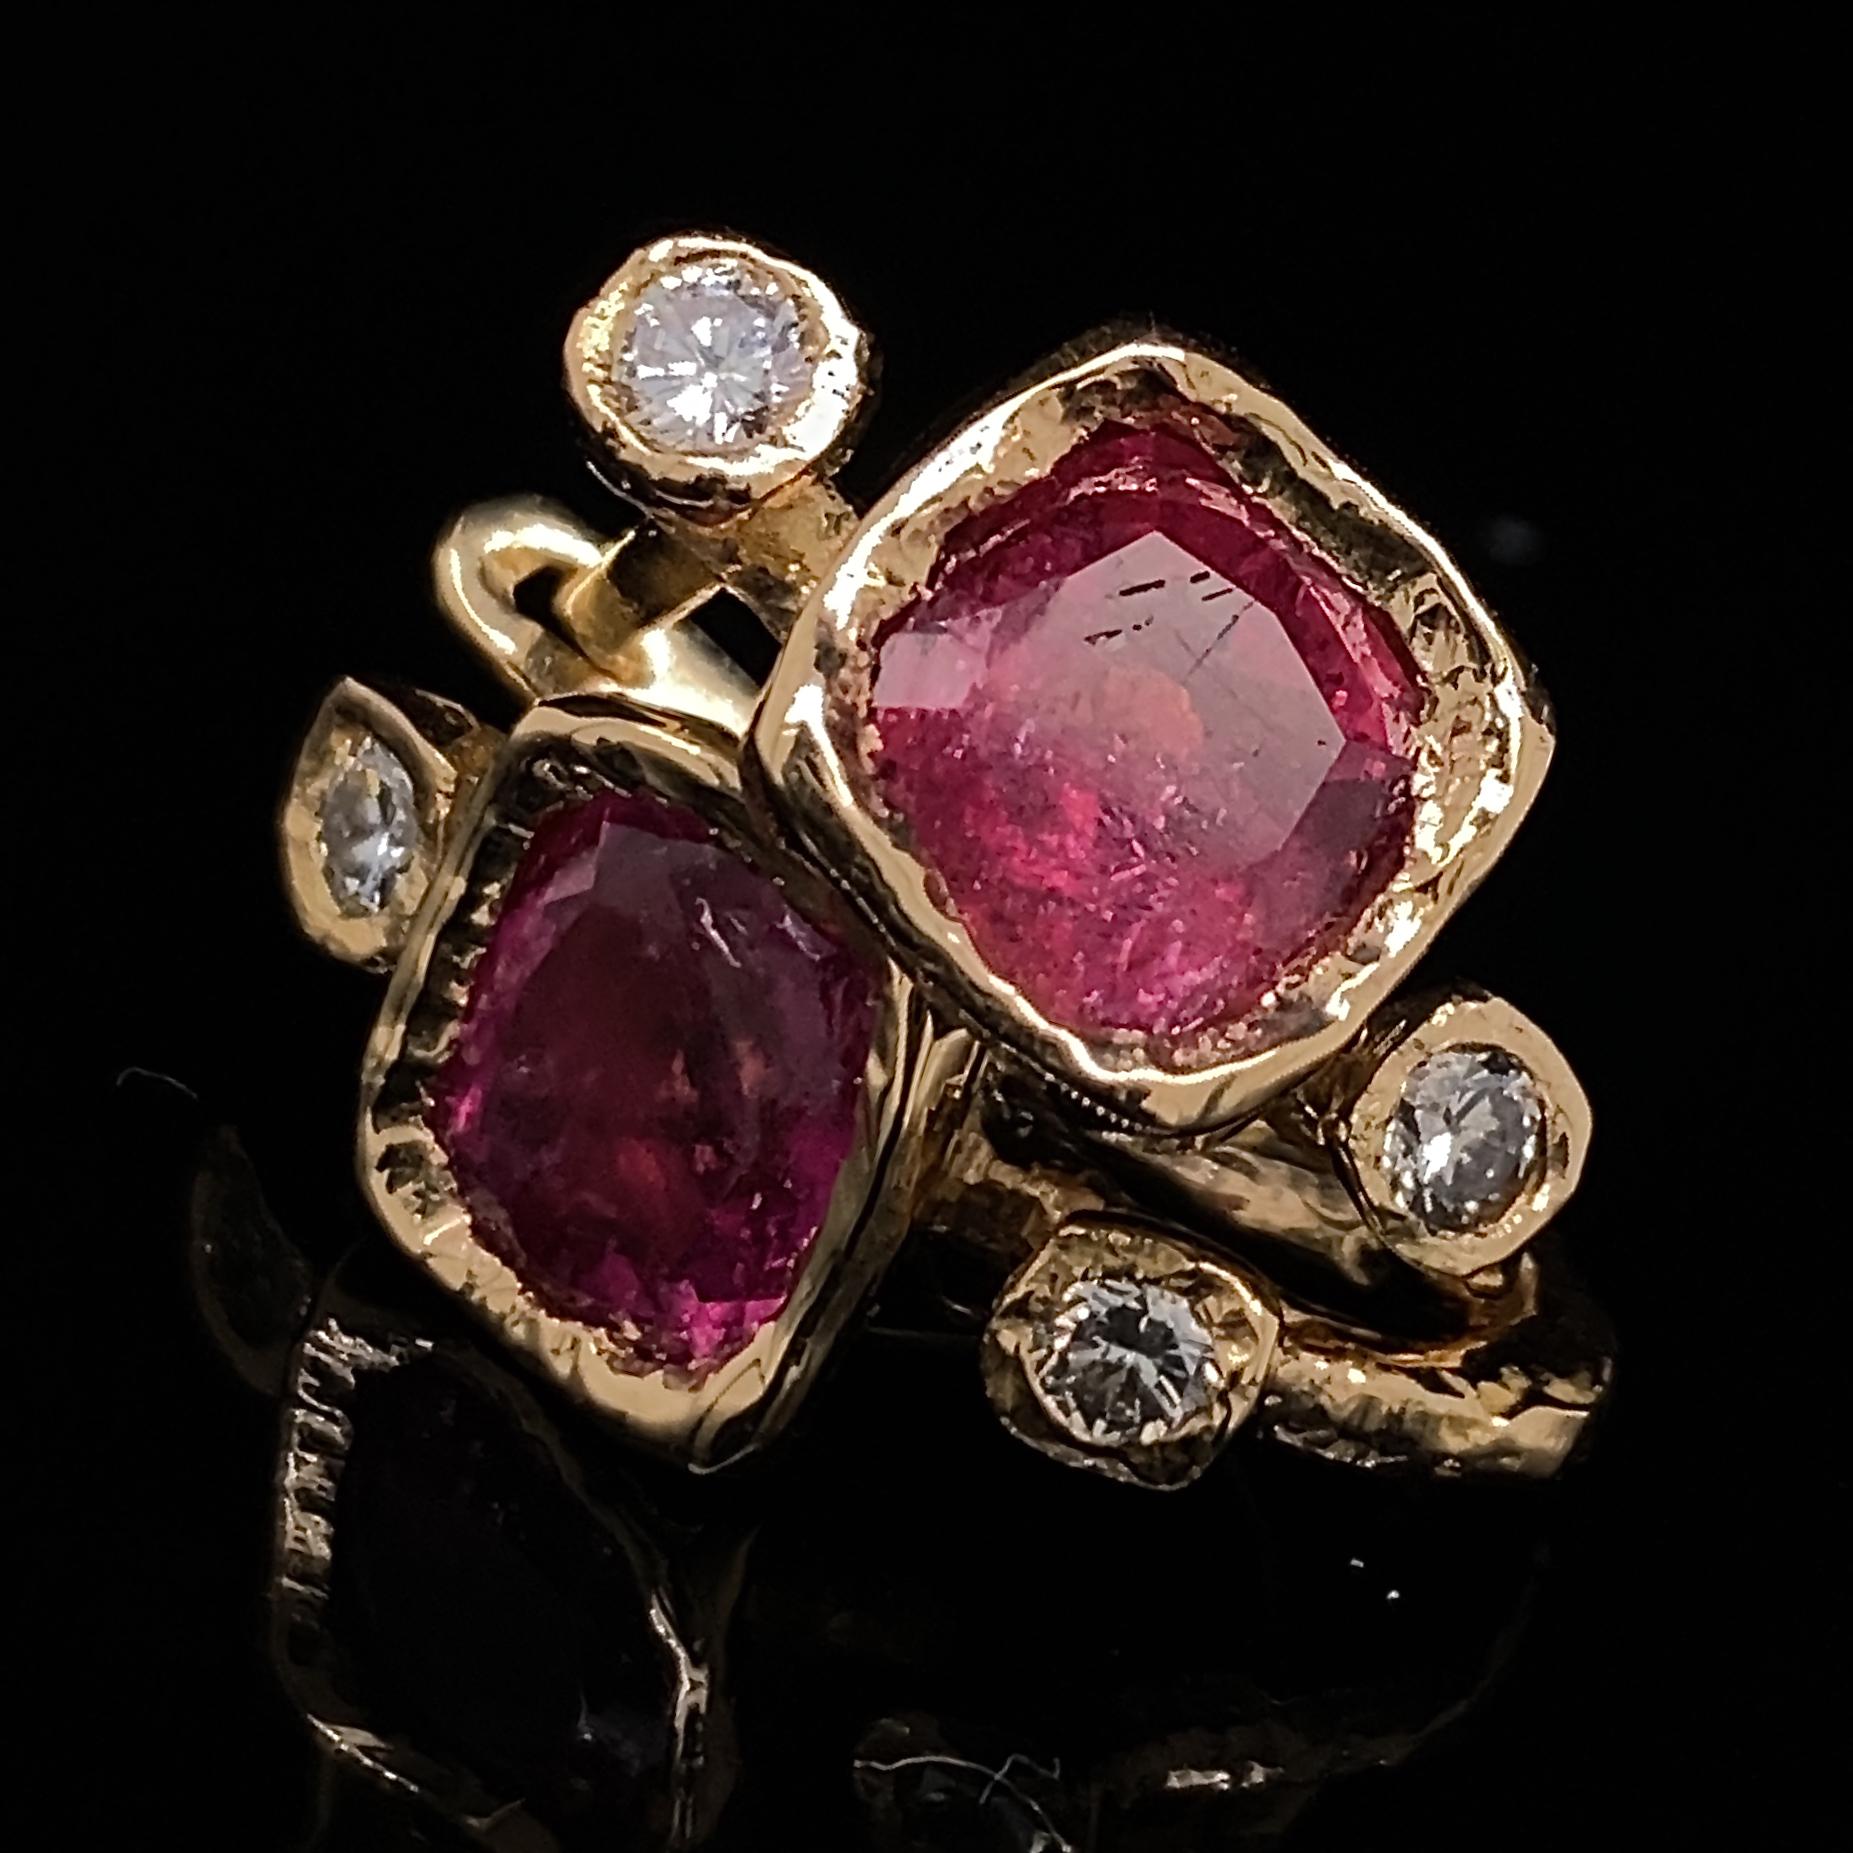 Contemporary Pink Tourmaline Lever-Back Drop Earrings with Diamond Accents in 18K Yellow Gold